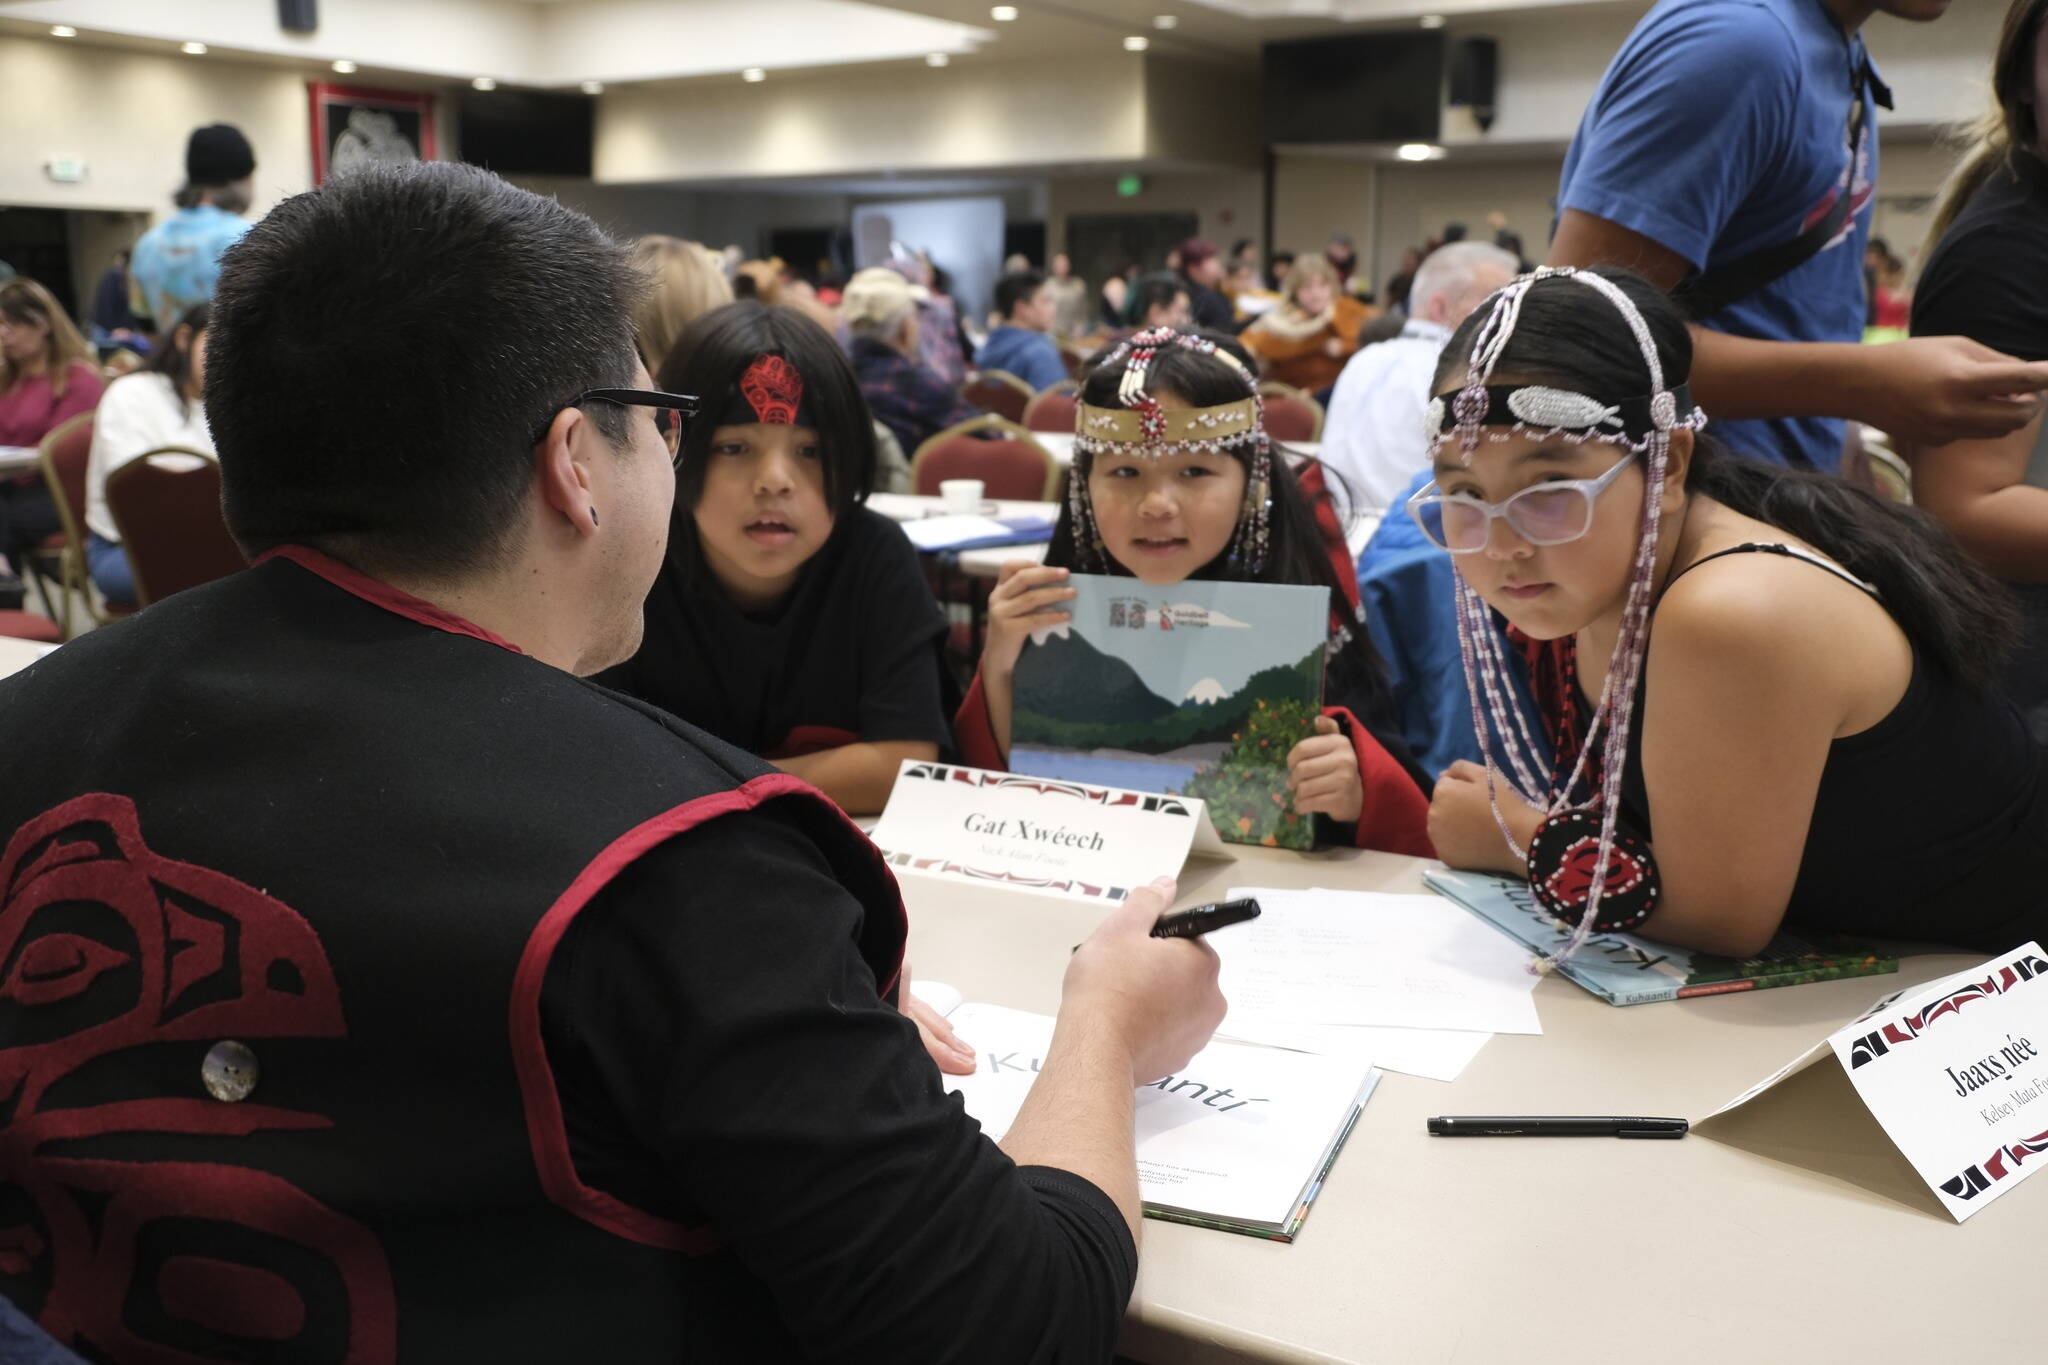 Children get copies of the Lingít-language book “Kuhaantí” signed during a launch party Oct. 27 at Elizabeth Peratrovich Hall. The book is intended to be the first of nine books and animated videos produced during the next two years sharing tribal stories in their Native language. (Photo courtesy of Central Council of Tlingit and Haida Indian Tribes of Alaska)